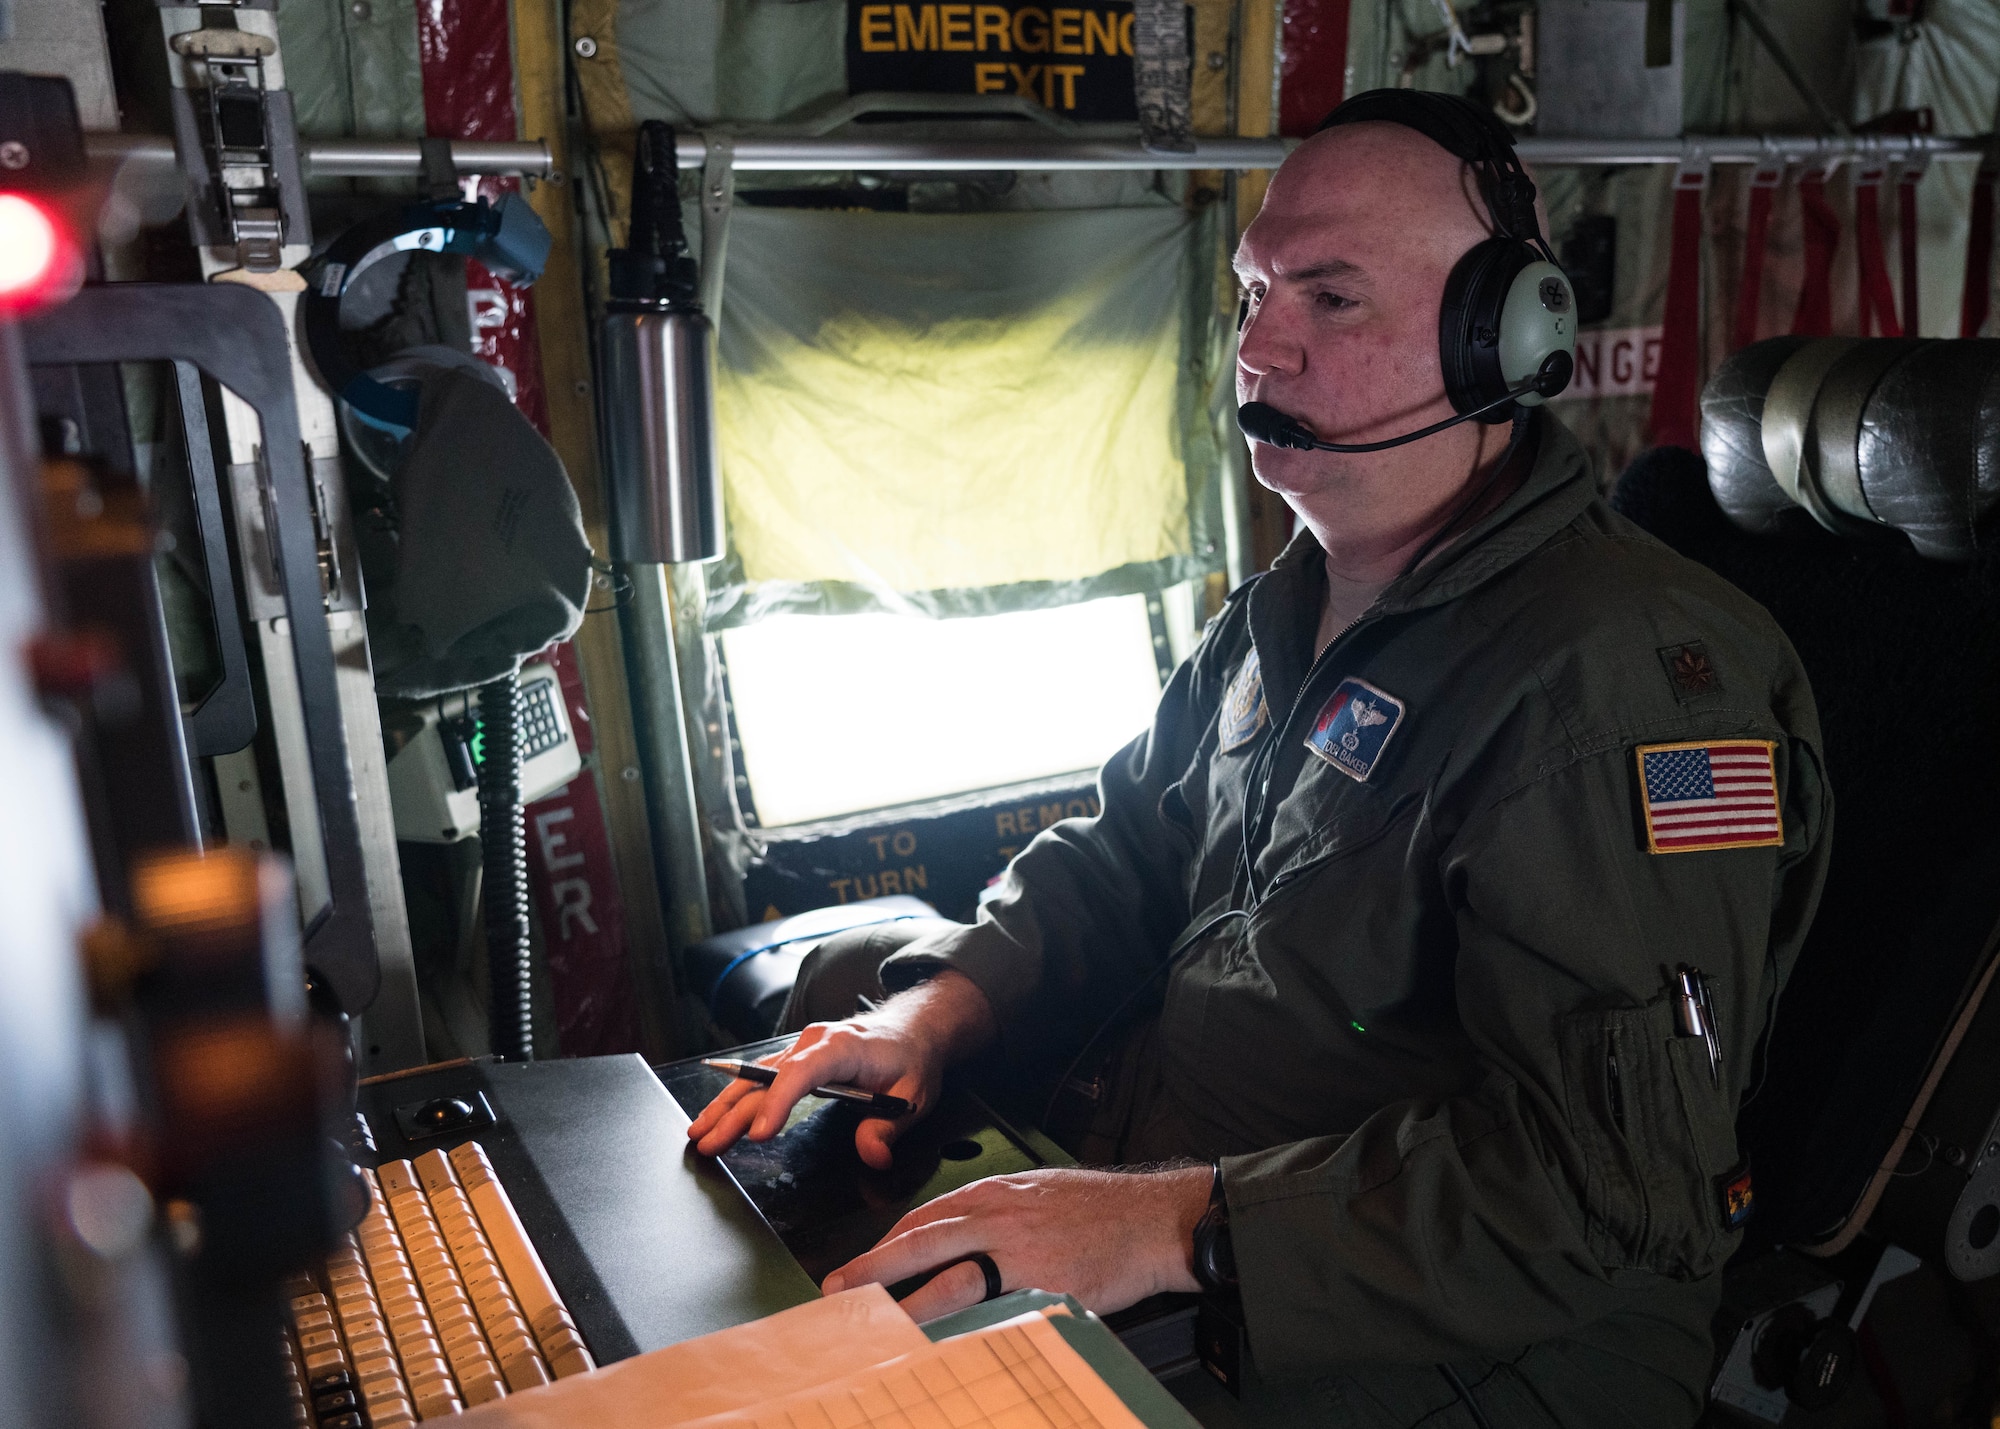 Maj. Tobi Baker, 53rd Weather Reconnaissance Squadron aerial reconnaissance weather officer, reviews weather data collected while flying in Hurricane Douglas July 26, 2020. The Air Force Reserve Hurricane Hunter aircrew flew into the first hurricane of the Pacific season to collect weather data to assist the Central Pacific Hurricane Center with their forecasts. The 53rd WRS, assigned to the 403rd Wing at Keesler Air Force Base, Mississippi, departed July 22 to conduct operations out of Barbers Point Kapolie Airport, Hawaii. (U.S. Air Force photo by Lt. Col. Marnee A.C. Losurdo)